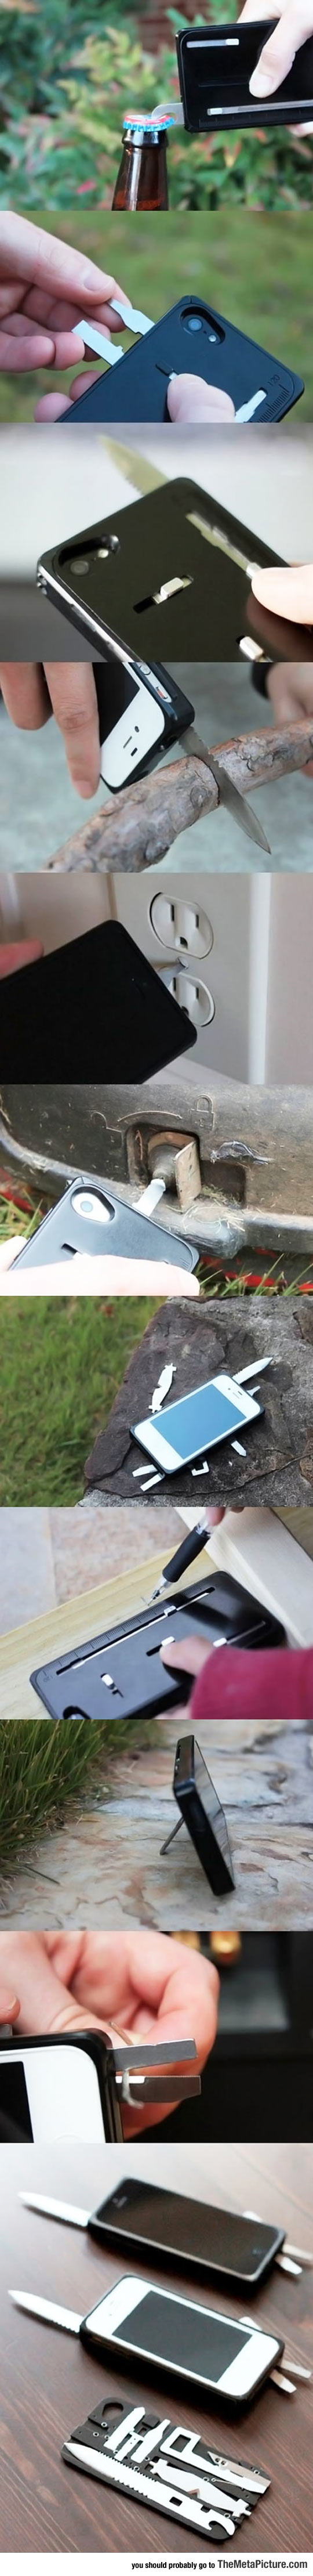 cool-iPhone-case-Swiss-army-knife